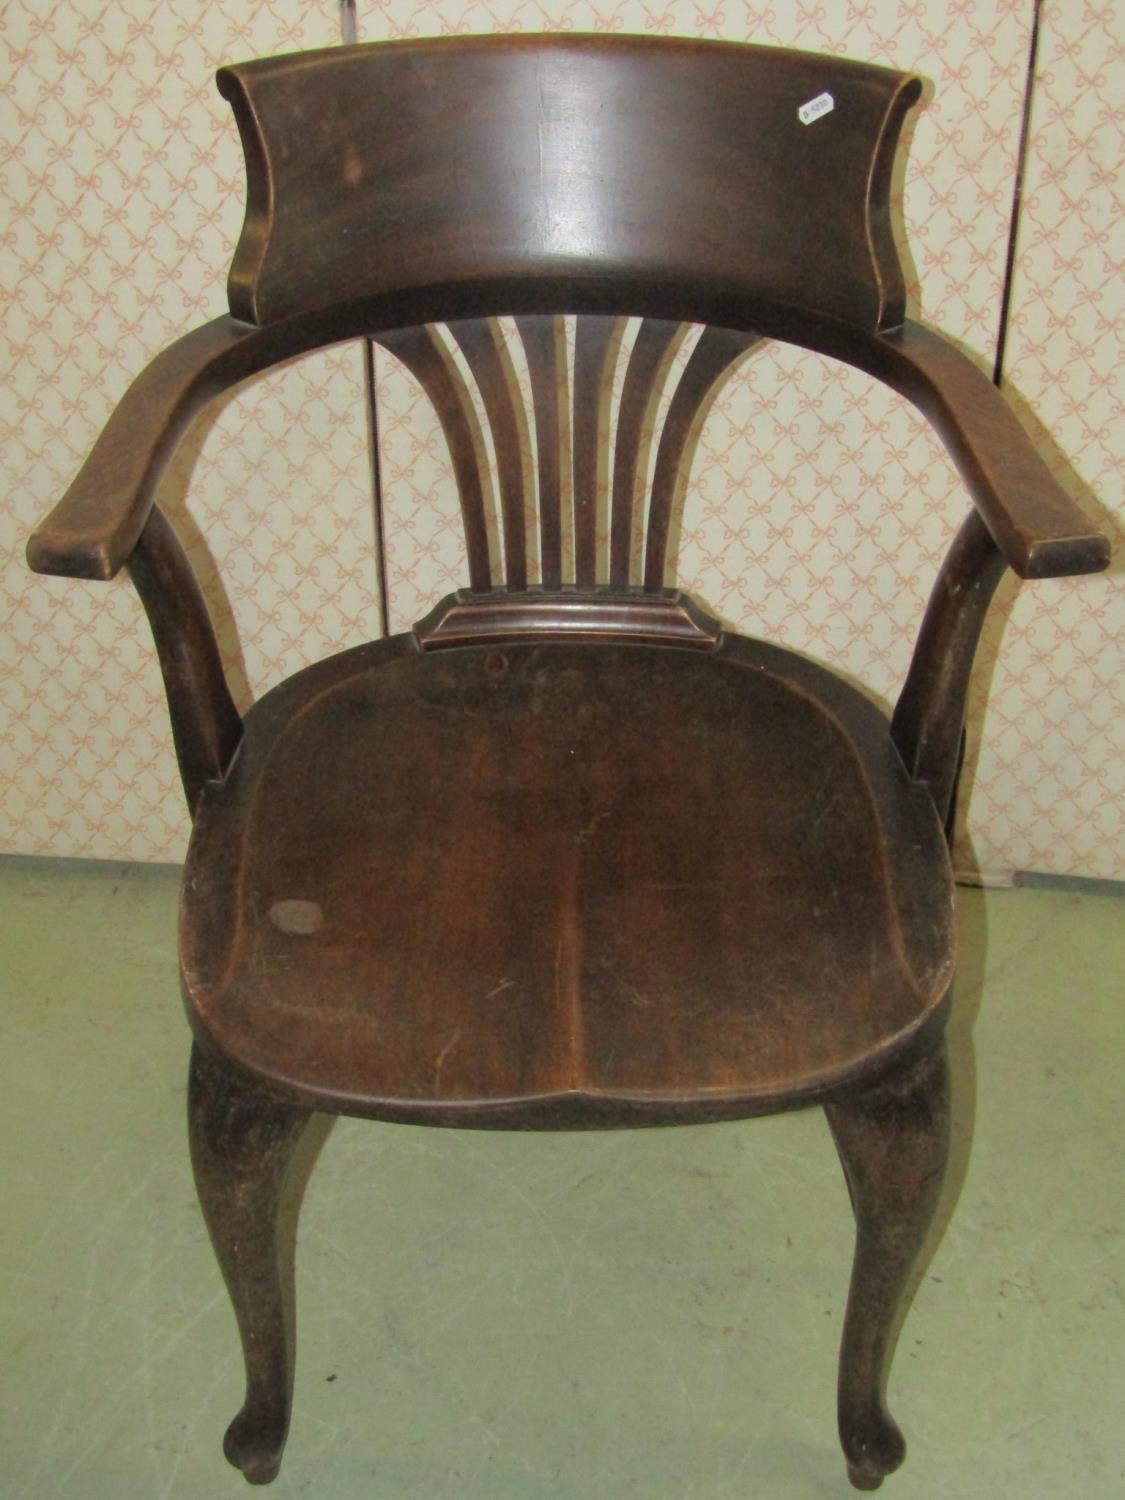 An early 20th century walnut office desk chair with combed splat over a saddle shaped seat - Image 2 of 2